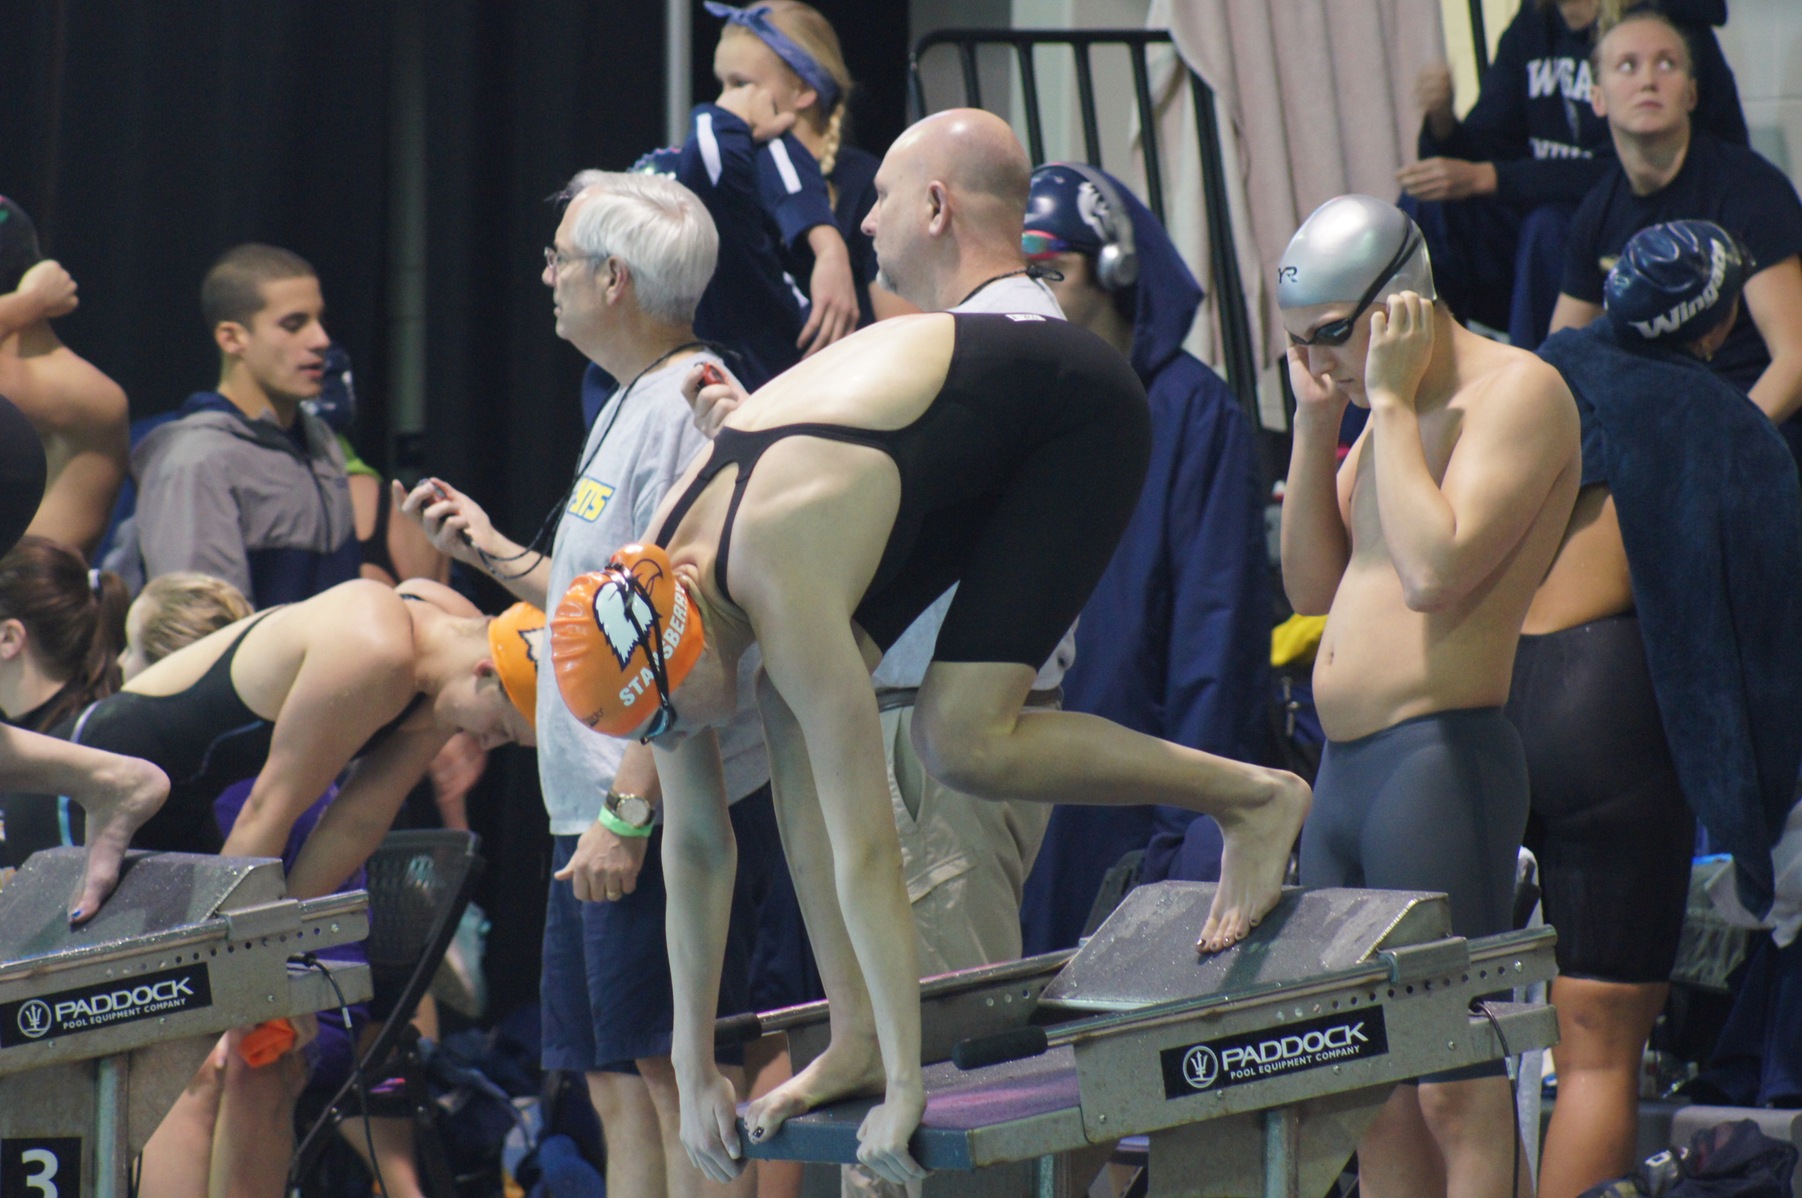 Eagles to swim for national title in 200 free relay